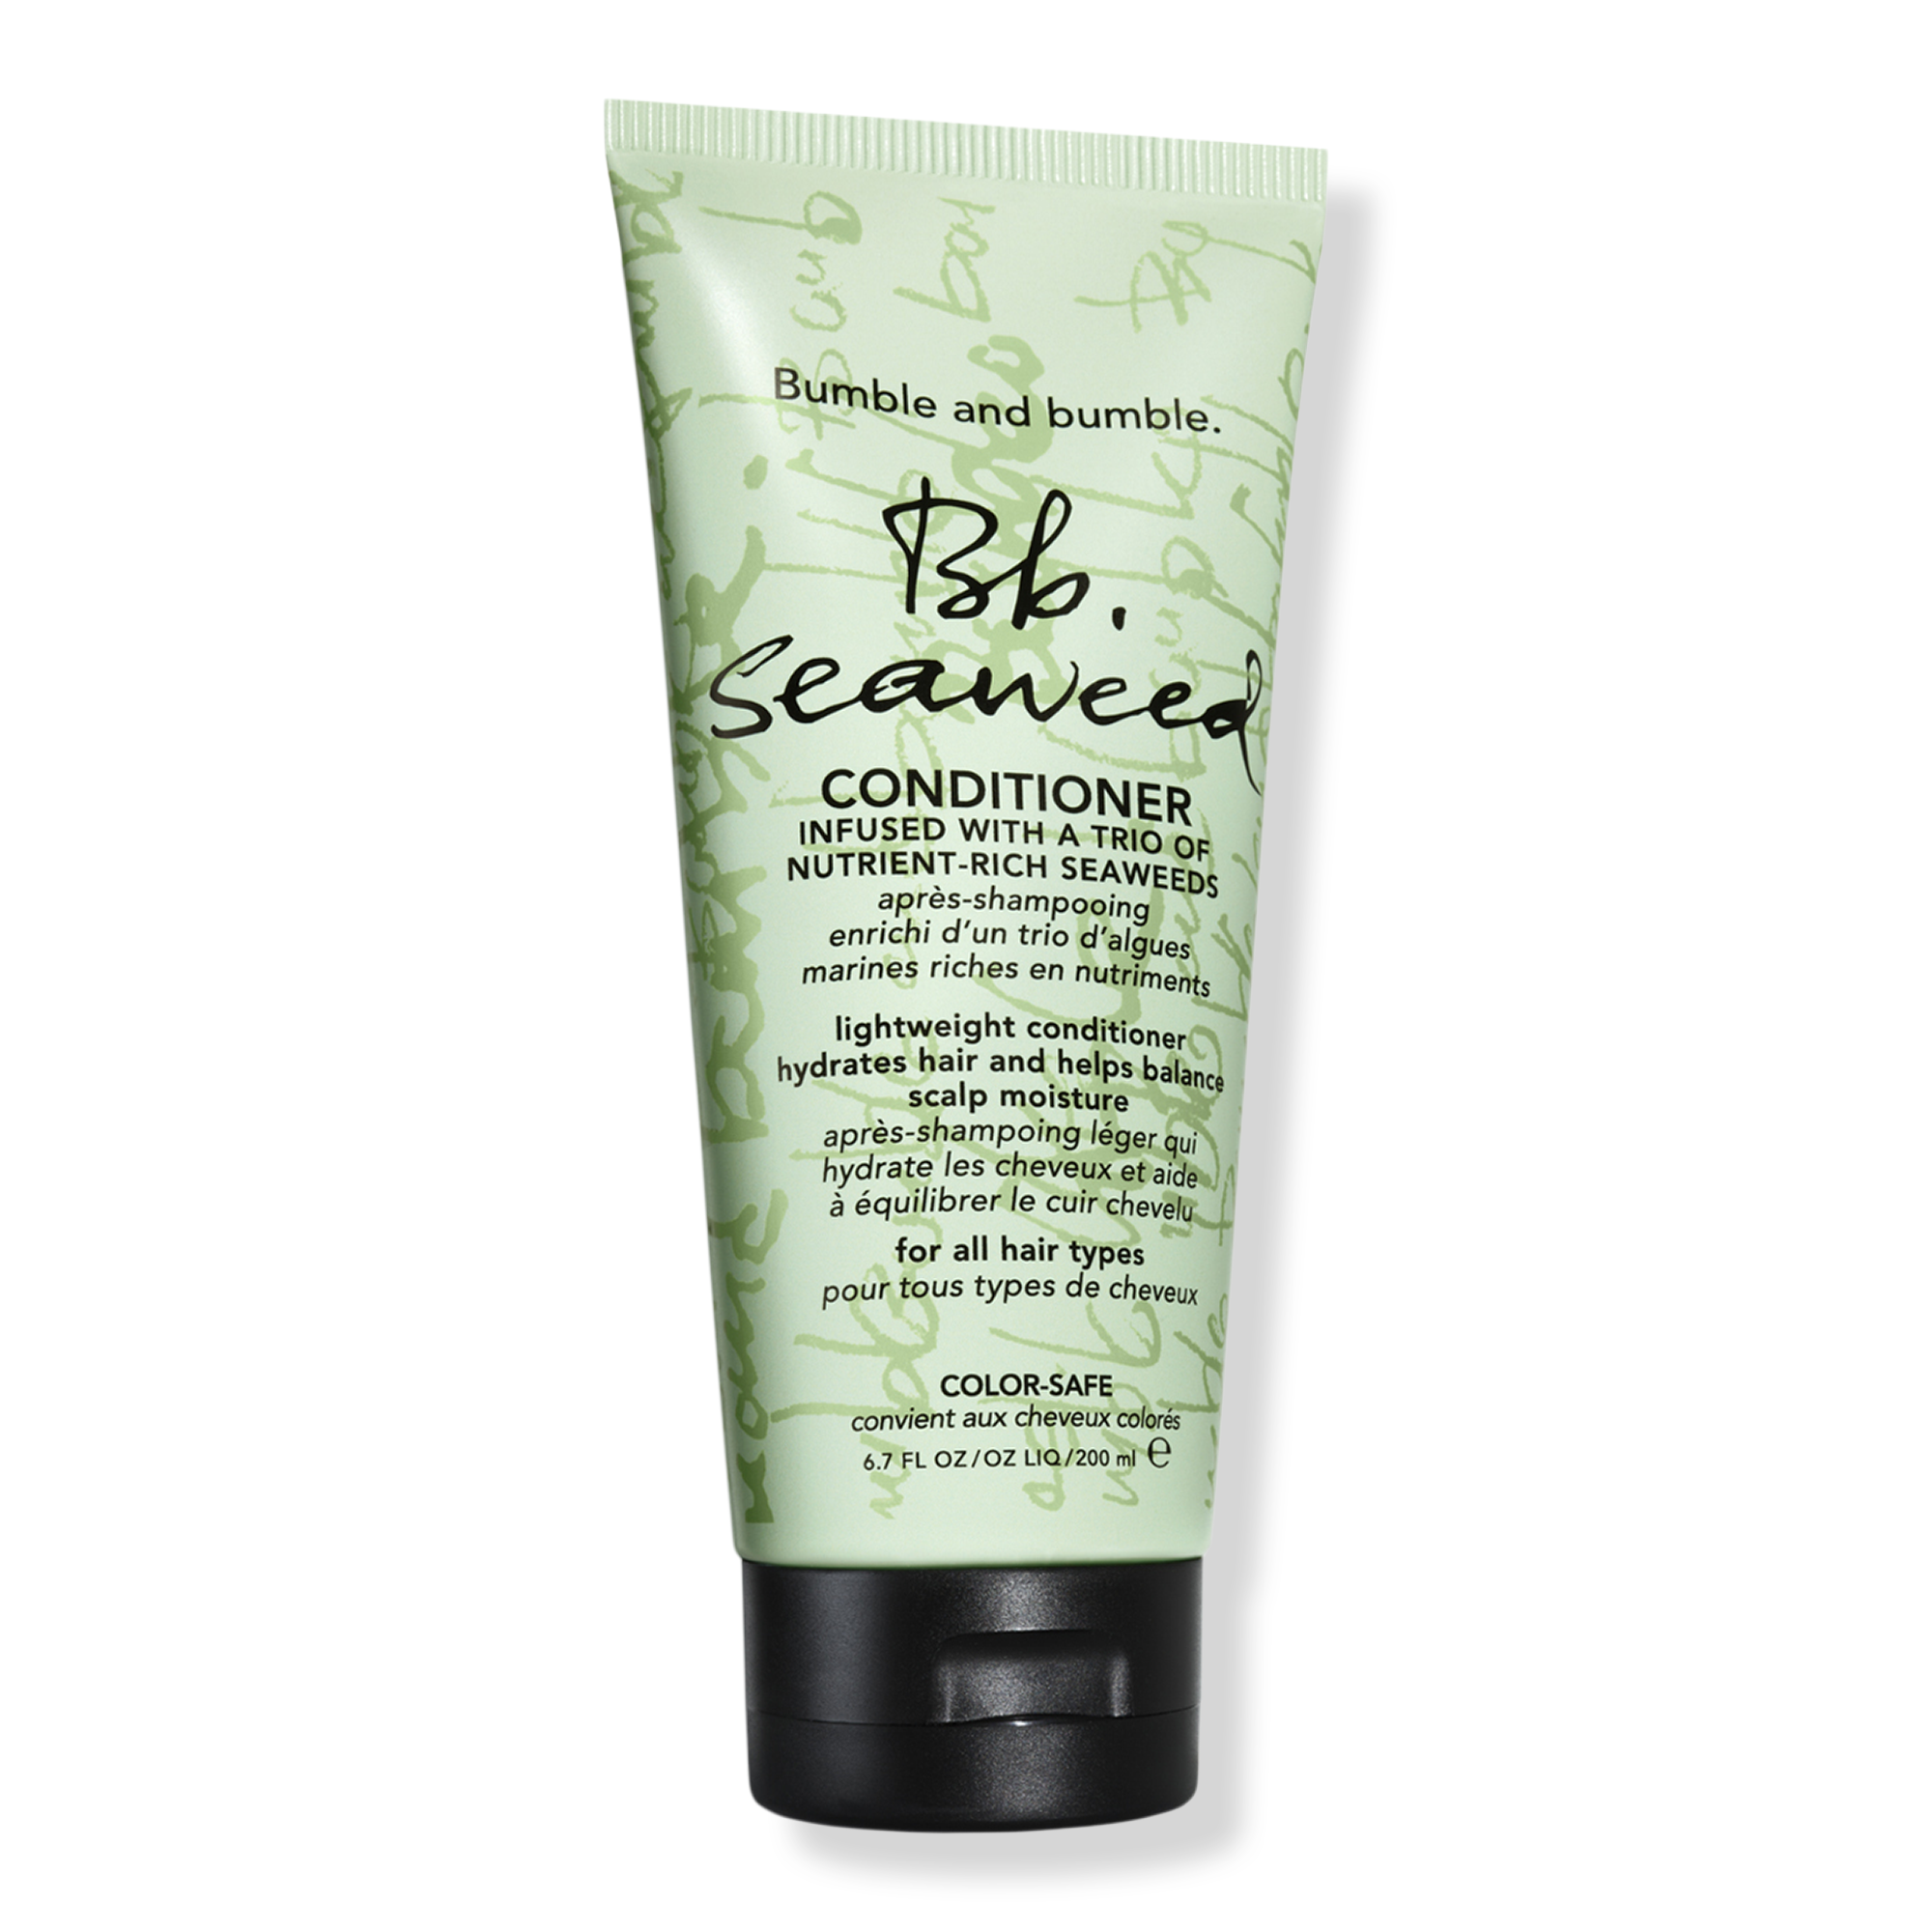 Bumble and bumble Seaweed Conditioner / 6.7OZ